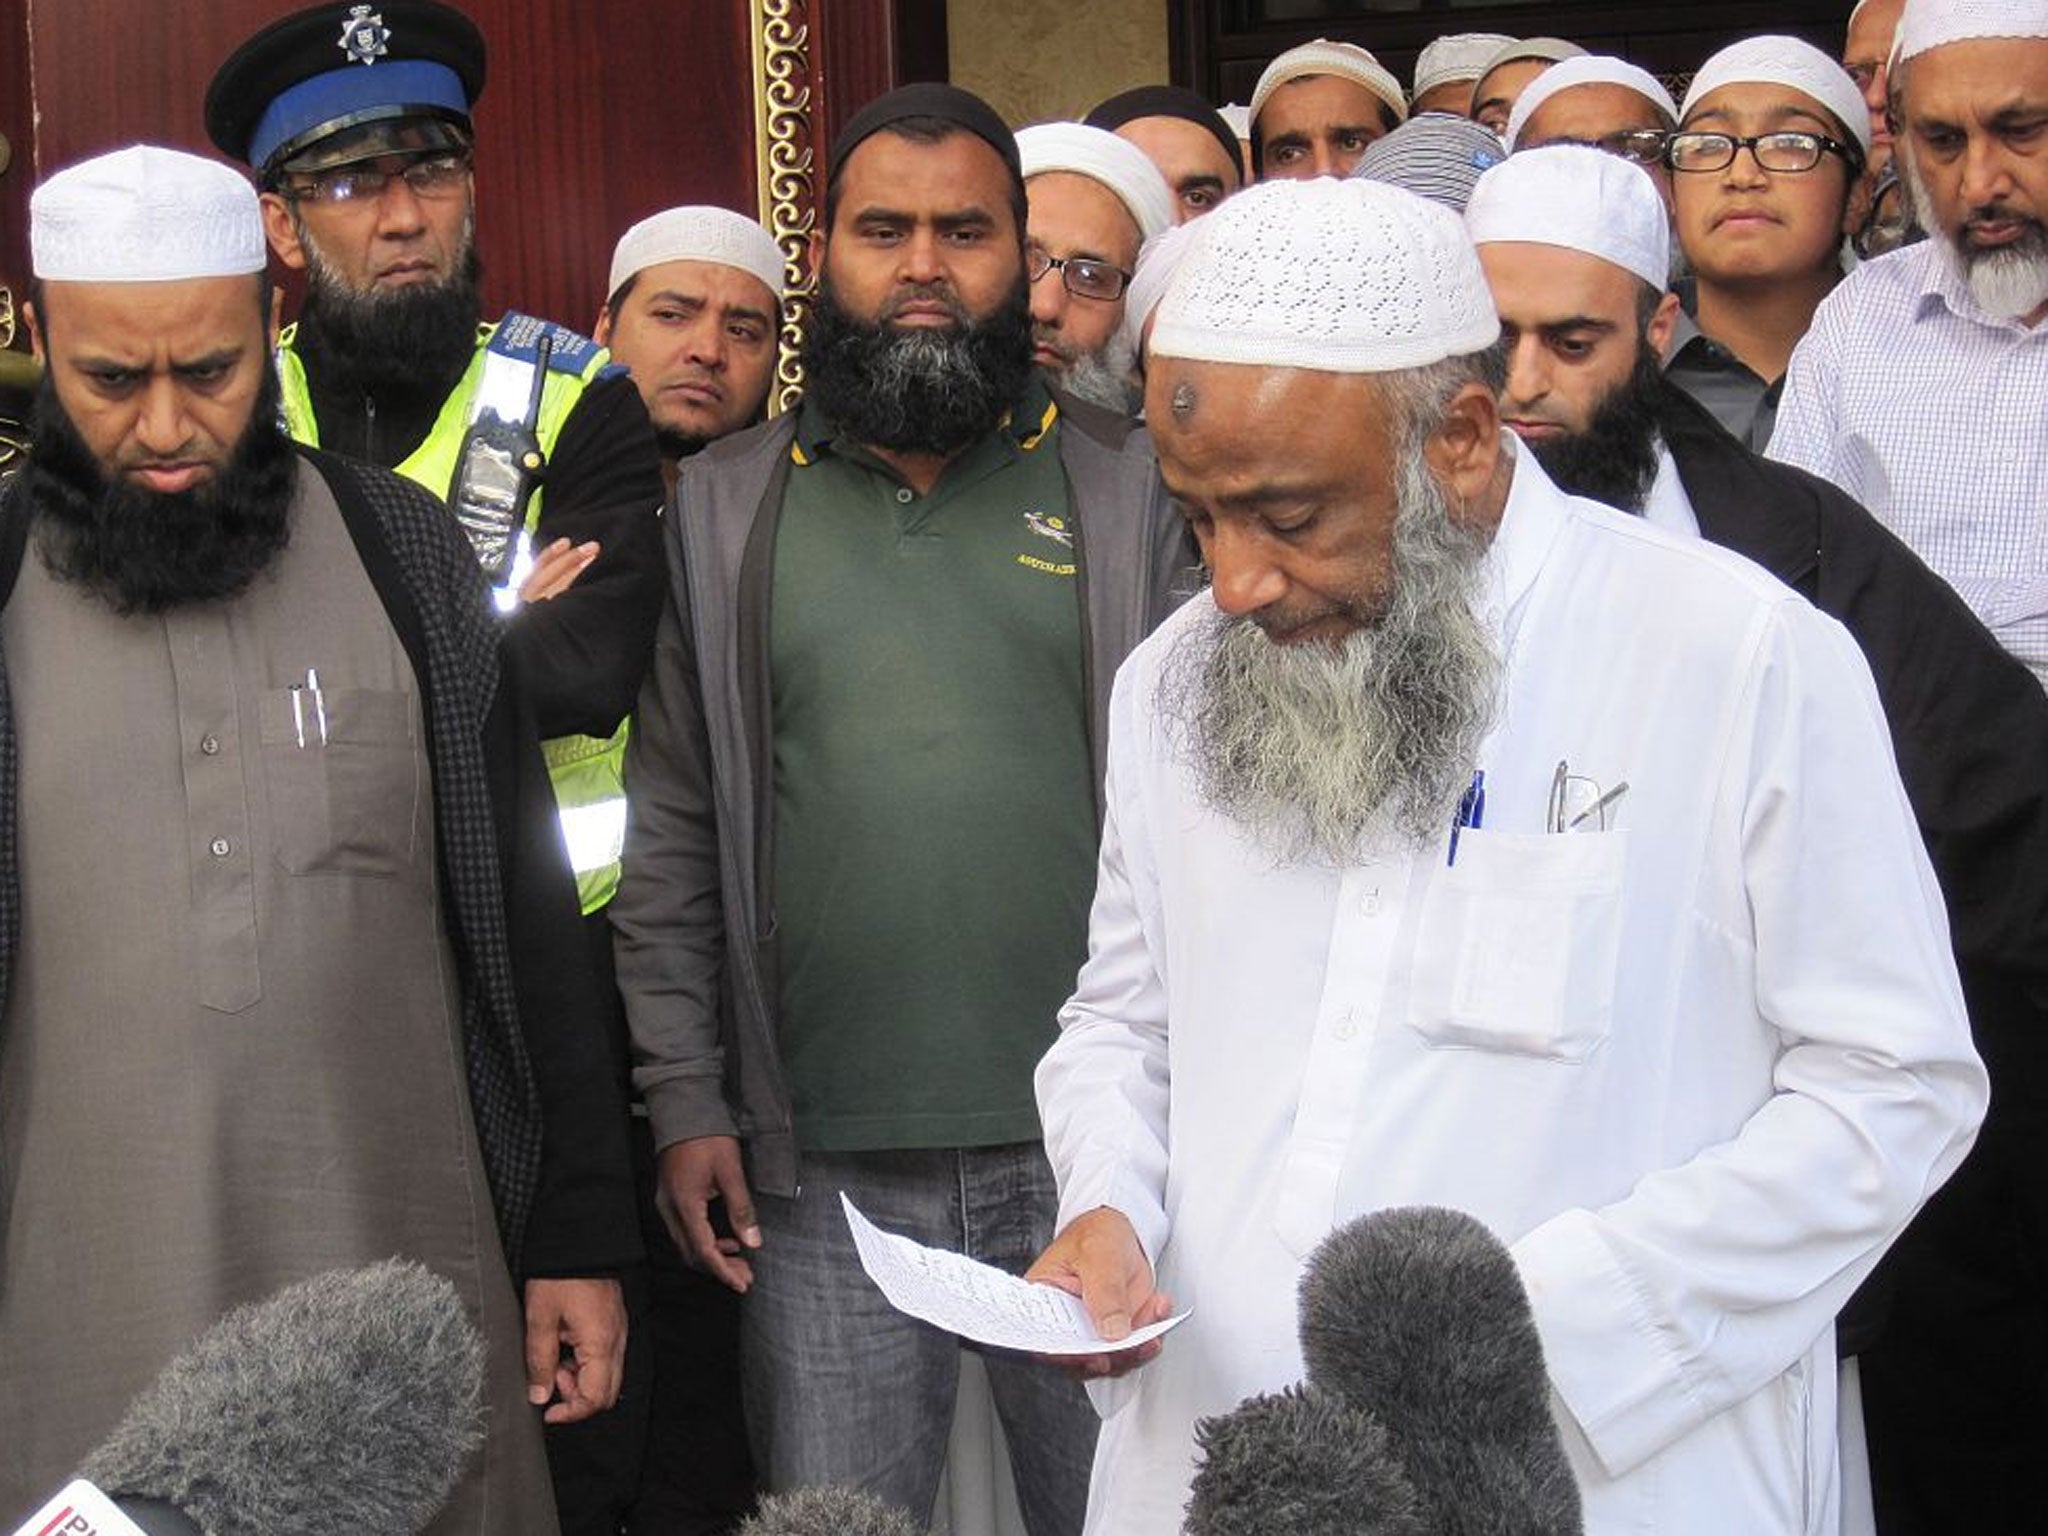 Muhammad Taufiq al-Sattar pays tribute to his wife and children who died in the fire